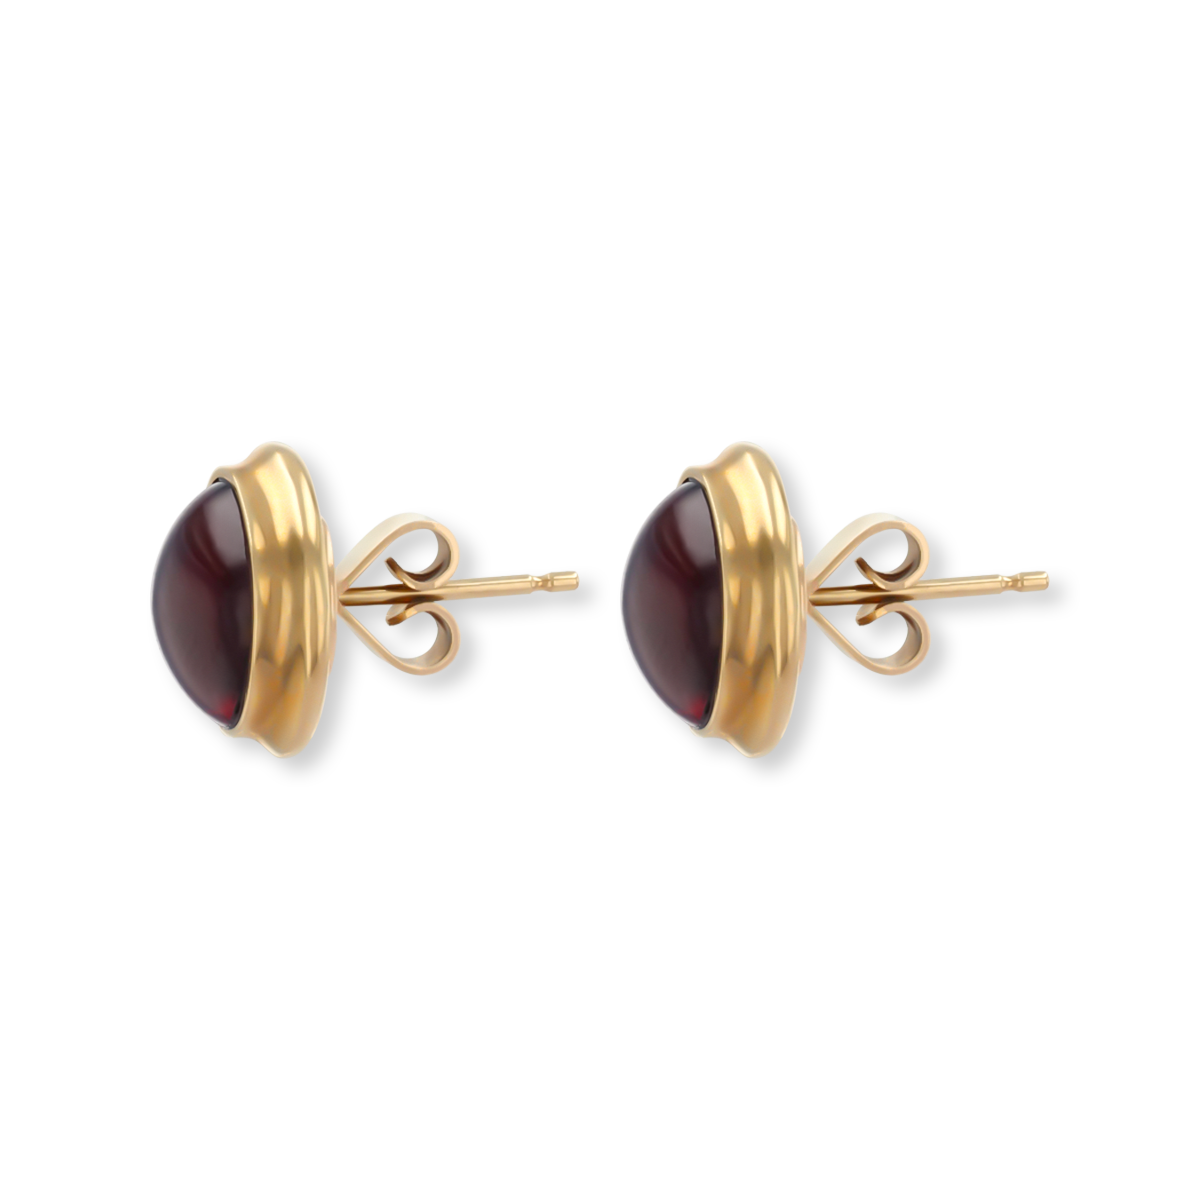 9ct Yellow Gold Round Cabochon Garnet Stud Earrings